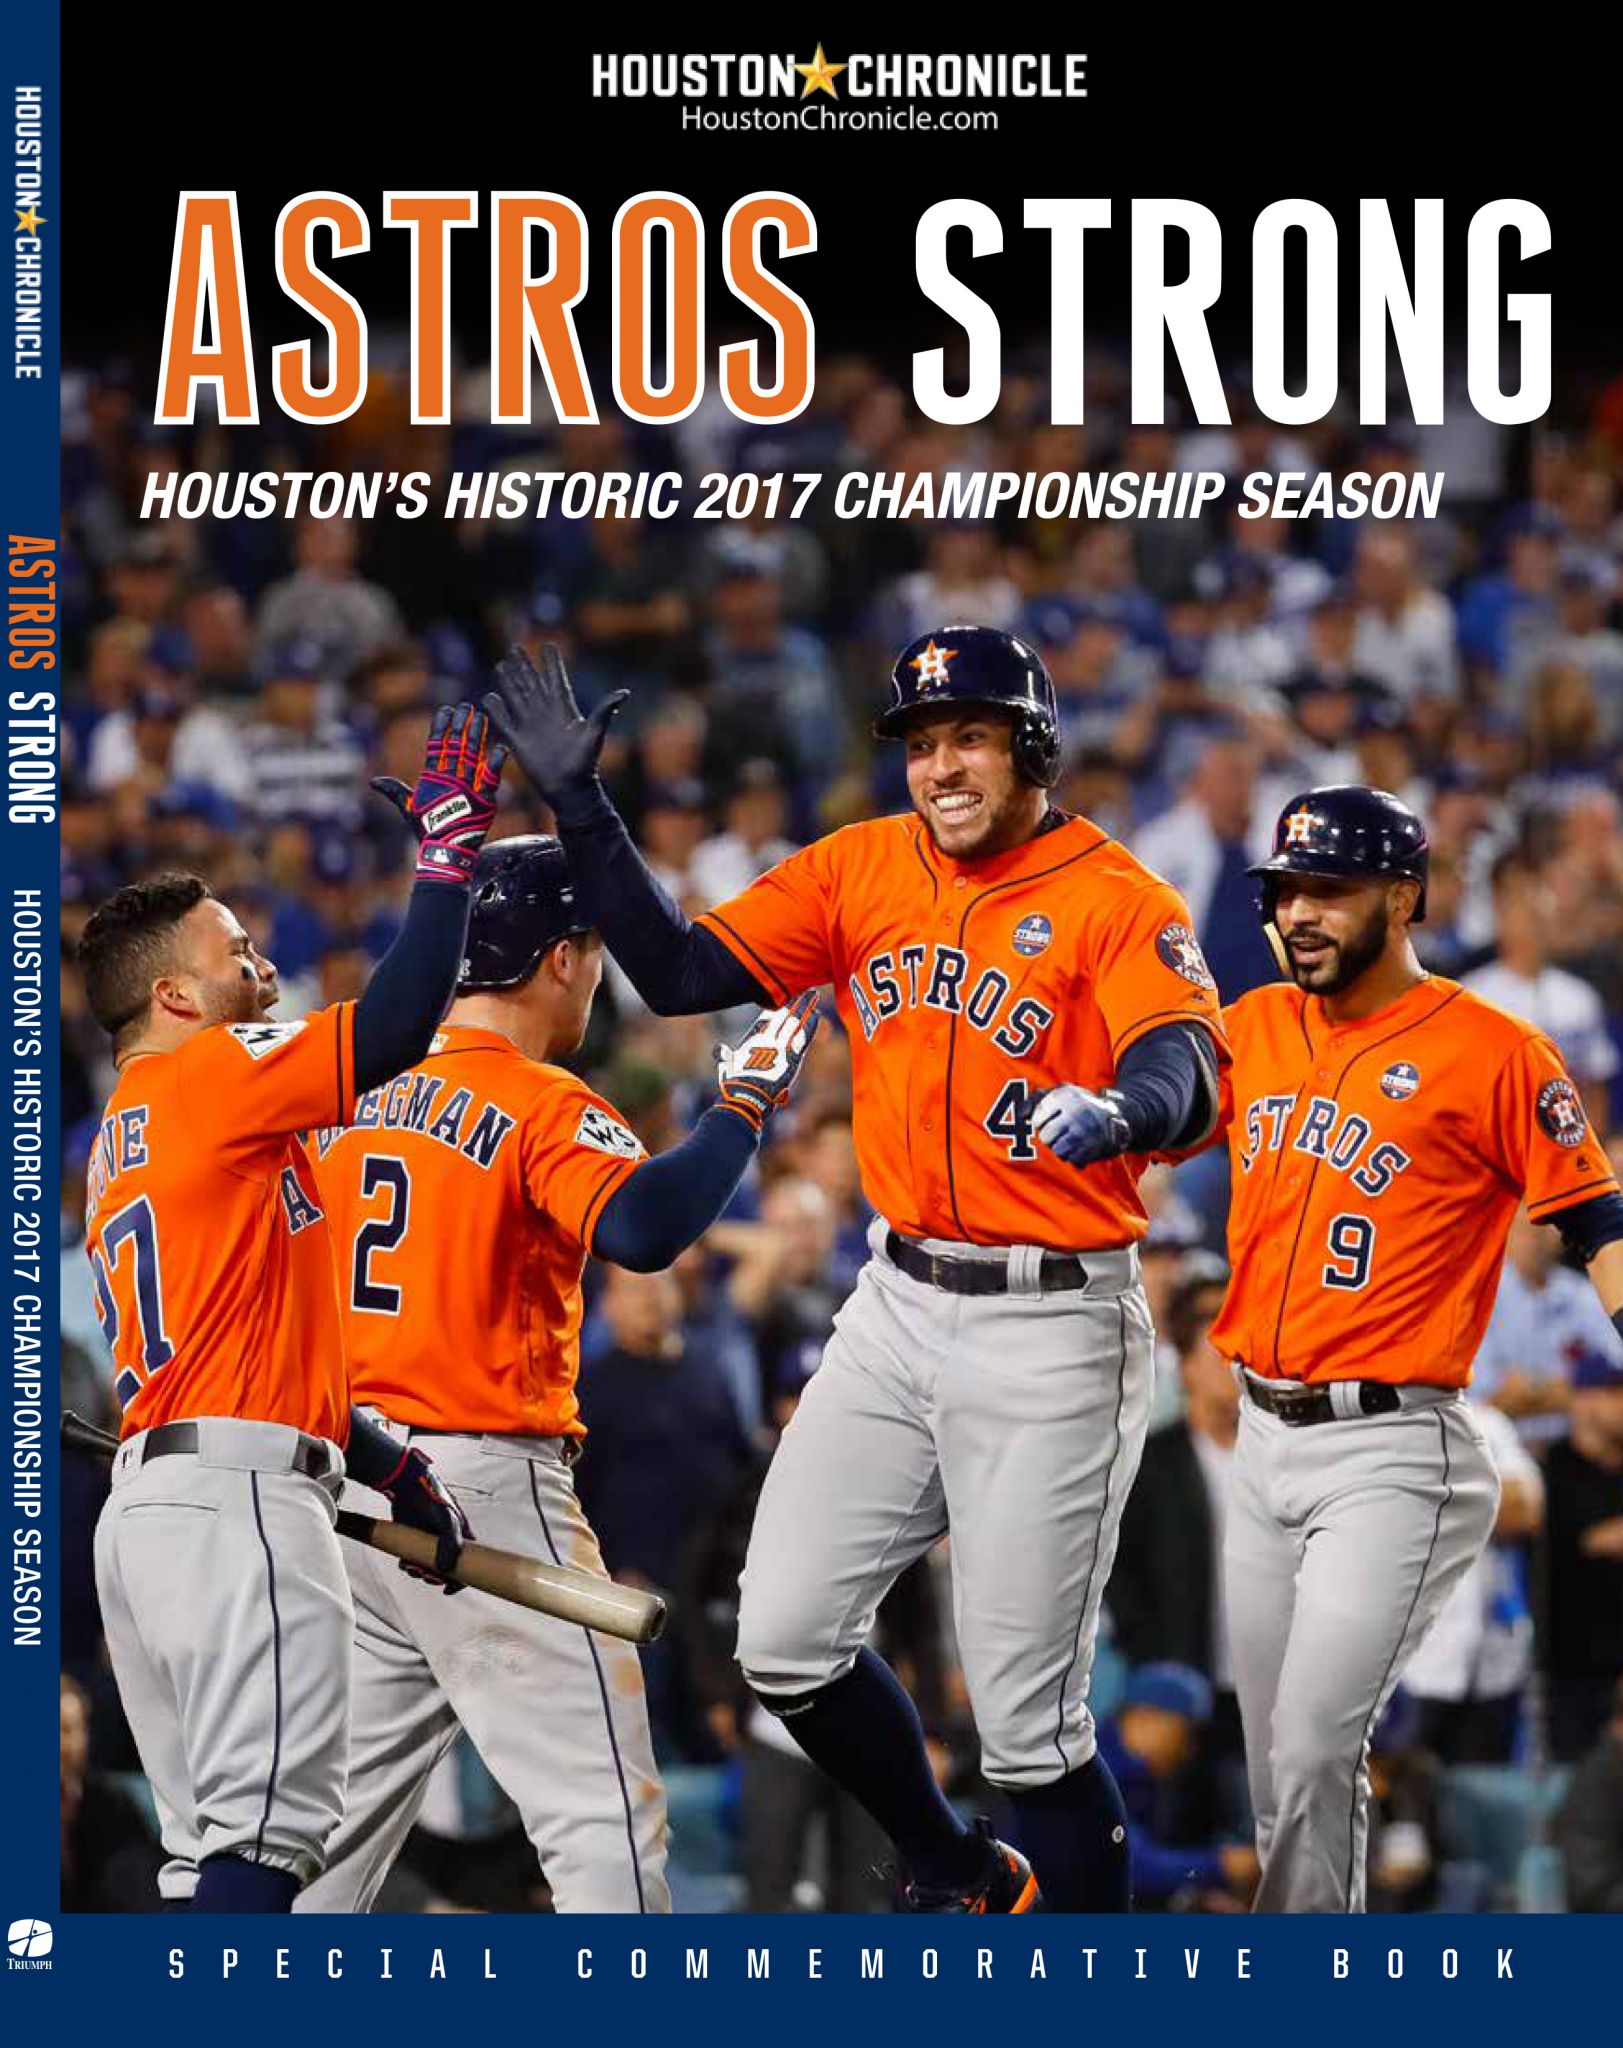 Houston Astros prove greatness in World Series win • The Tulane Hullabaloo